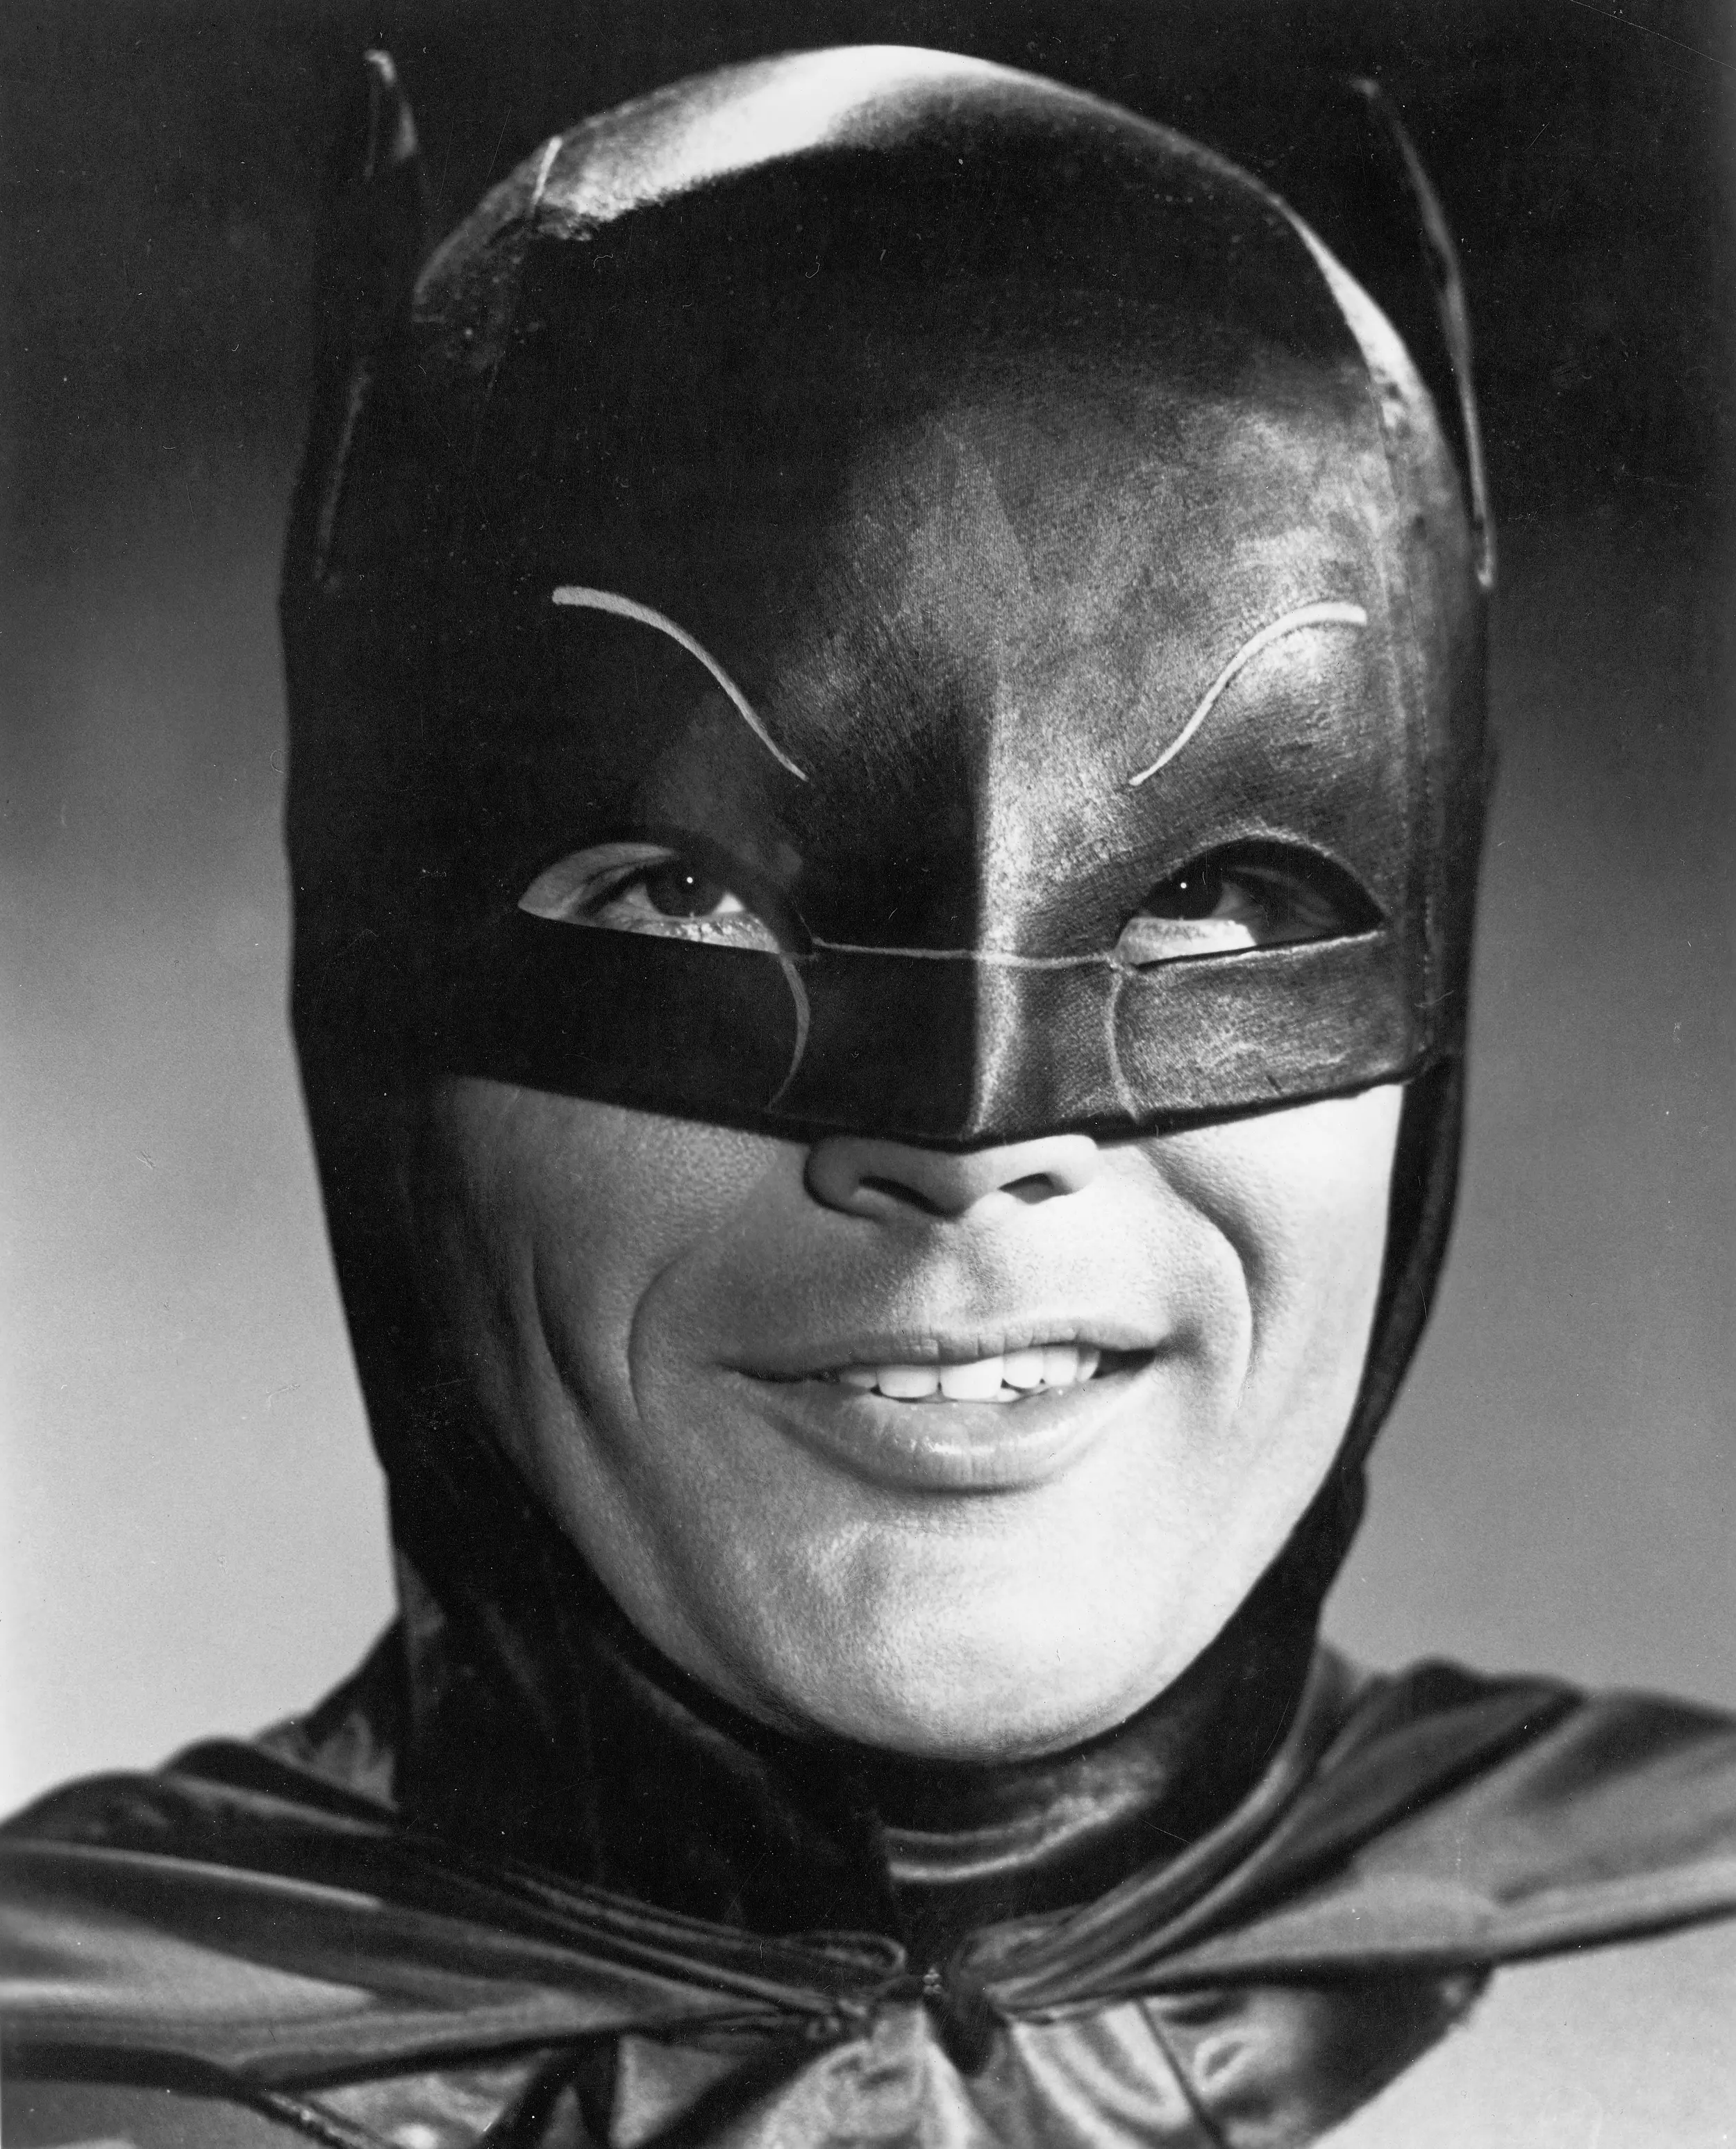 Batman Day Is Next Week, Does WA Icon Have His Statue Yet?